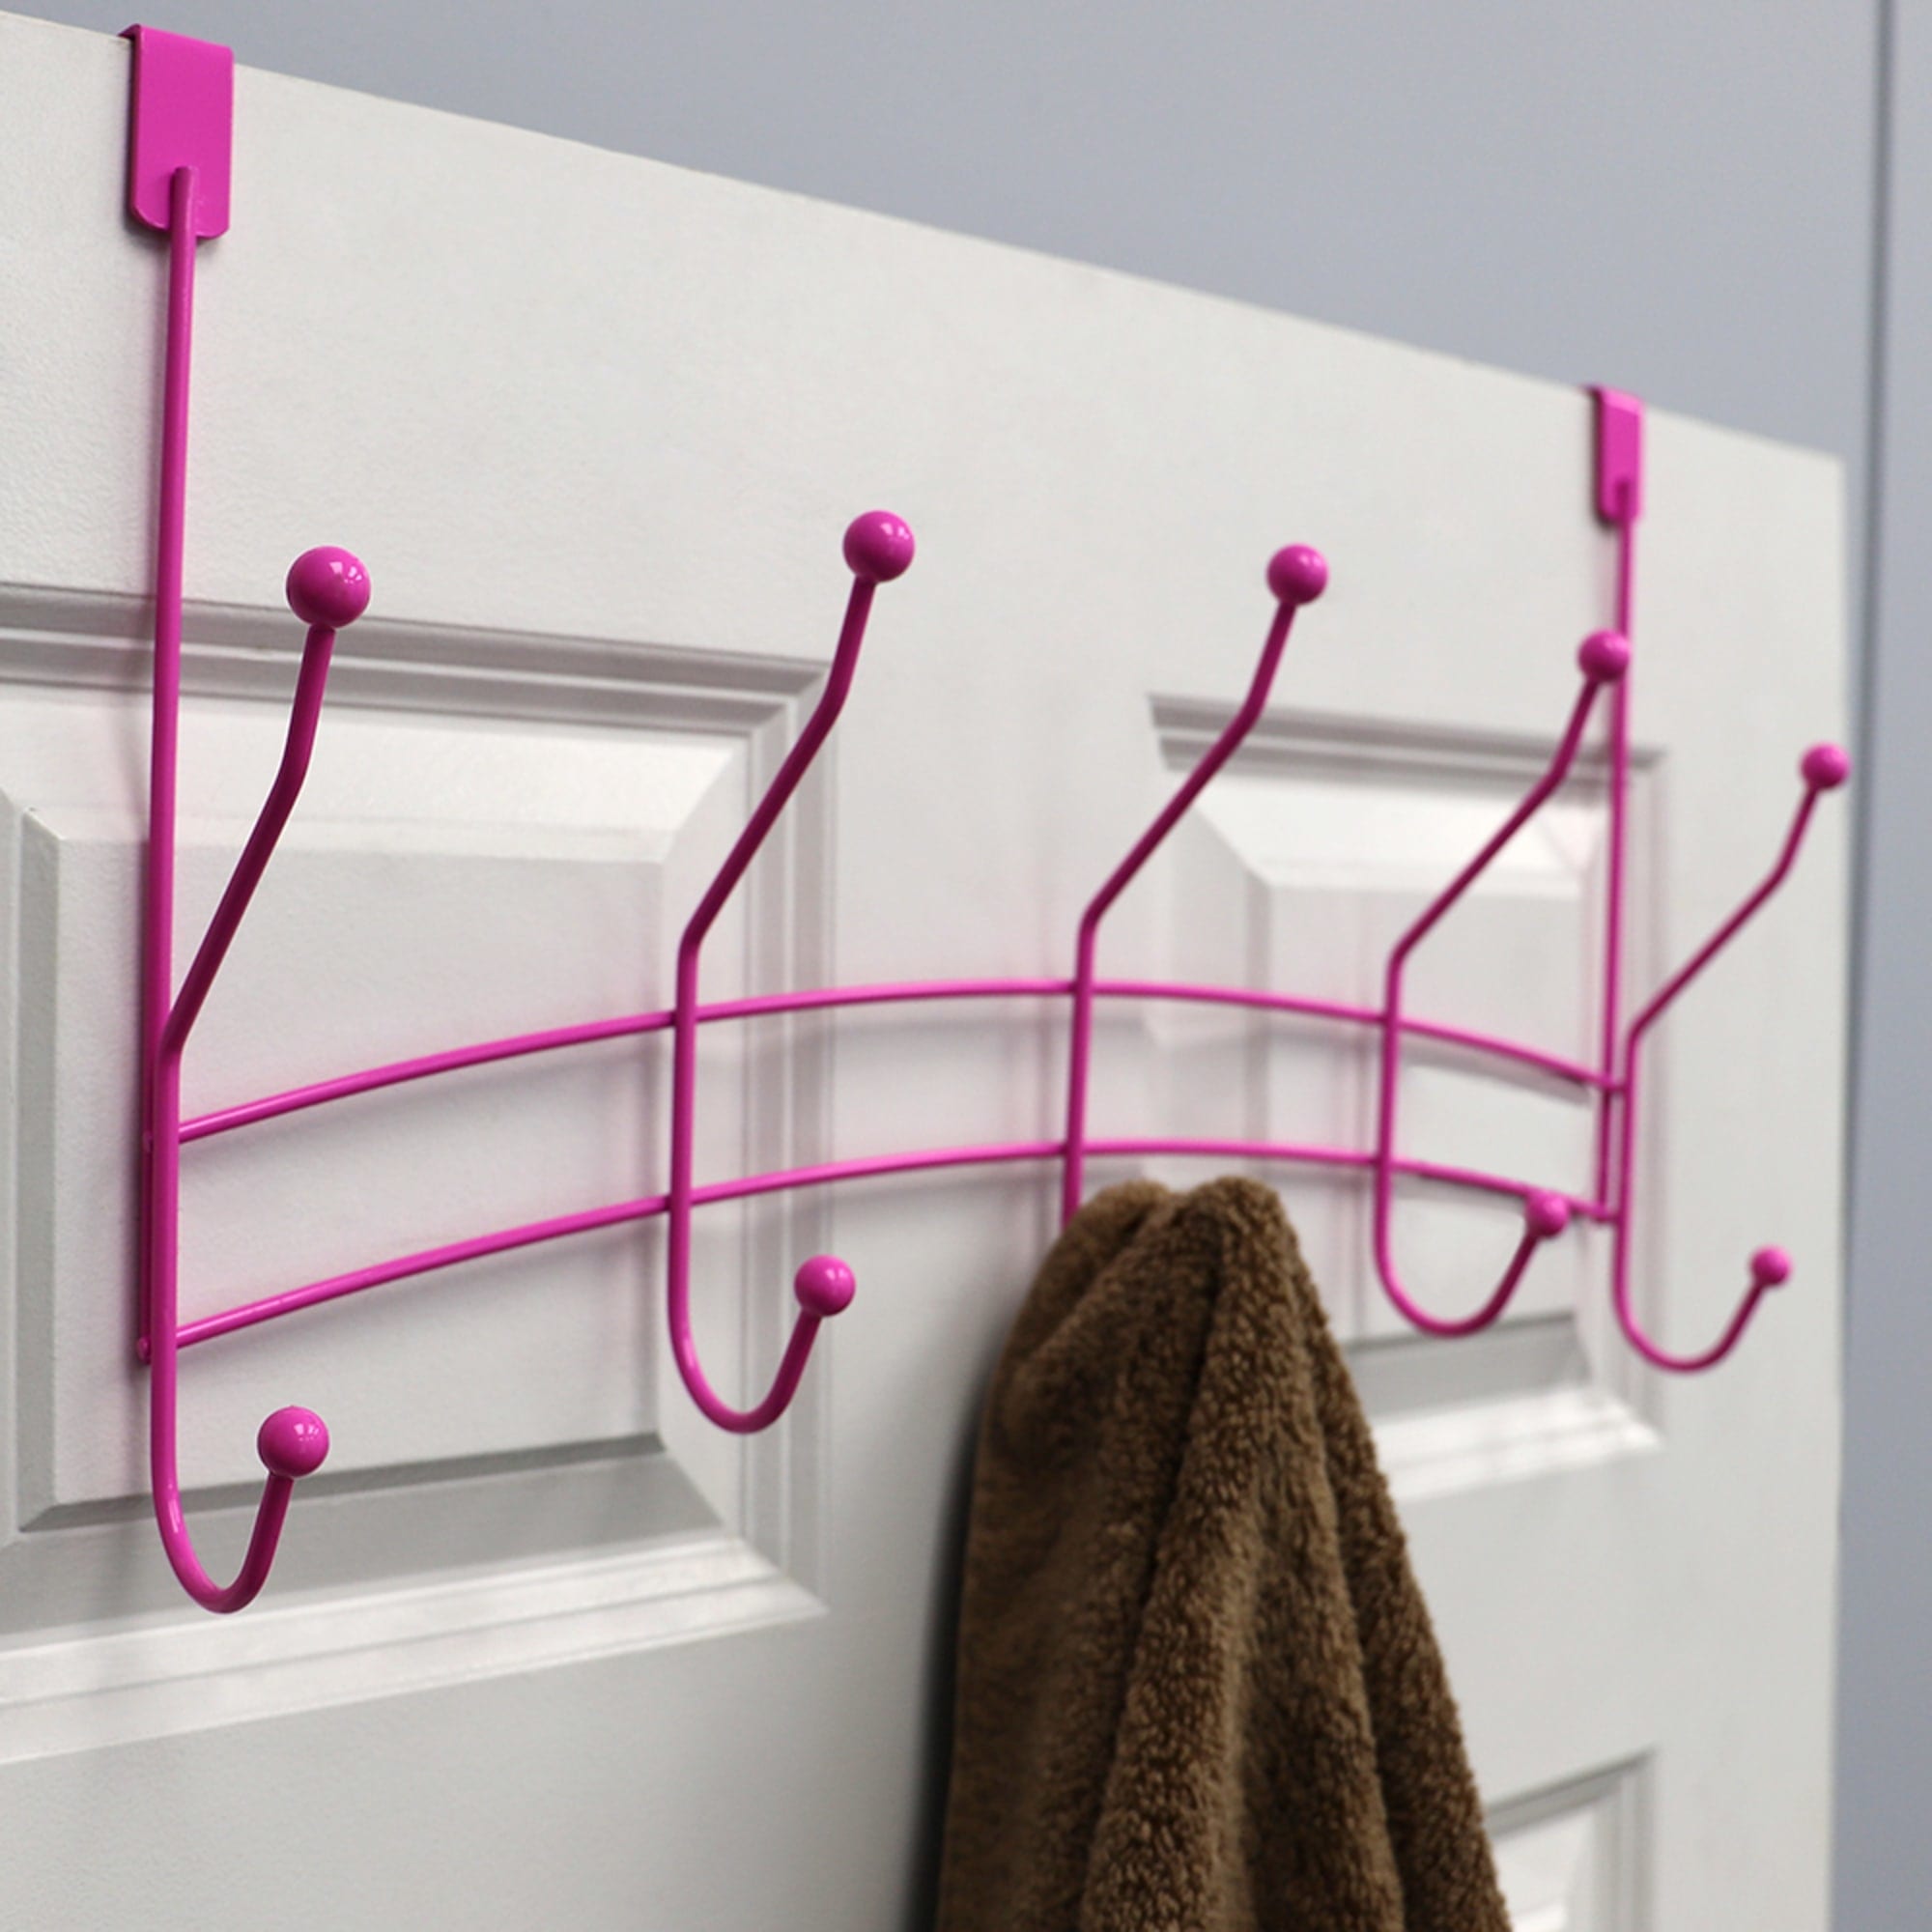 Home Basics Shelby 5 Double Tiered Hook Over the Door Hanging Rack, Pink $6.00 EACH, CASE PACK OF 12